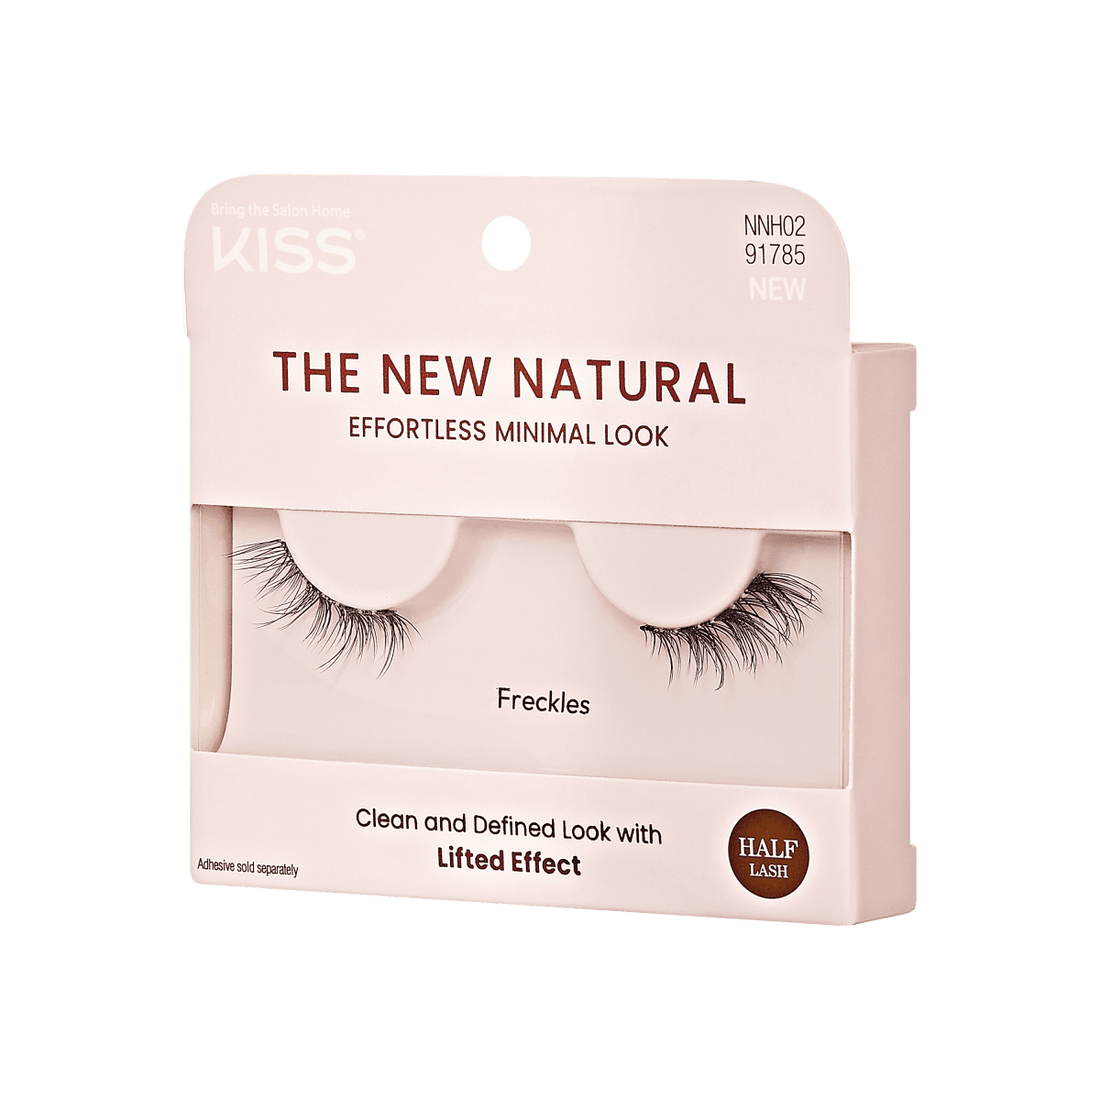 Product packaging for &quot;The New Natural&quot; false lashes from KISS, designed to look like natural lashes. no glue included